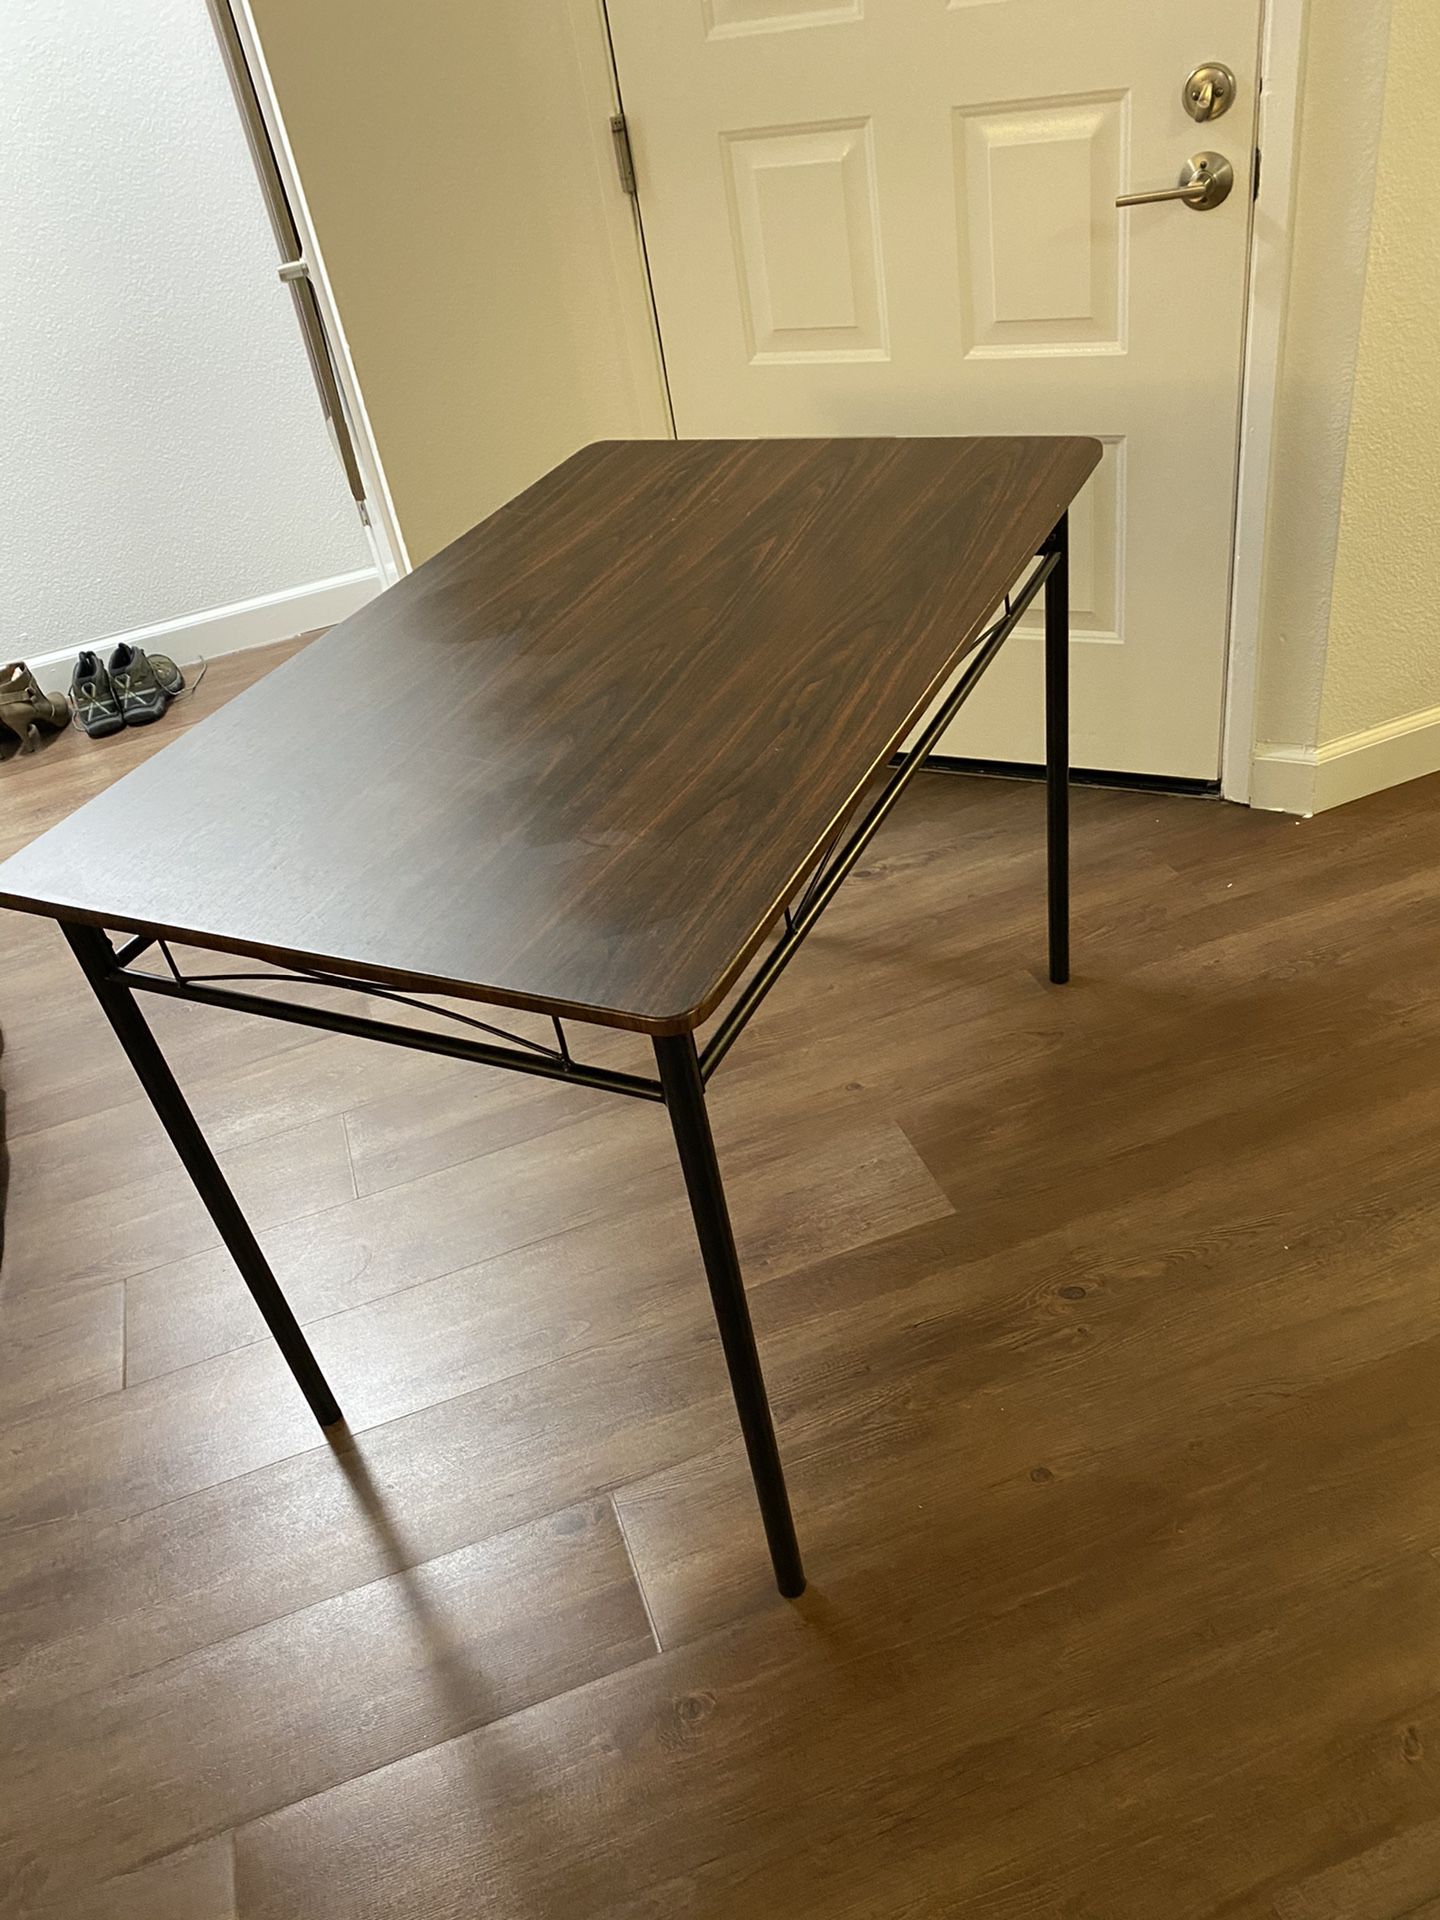 Dining table (no chairs)